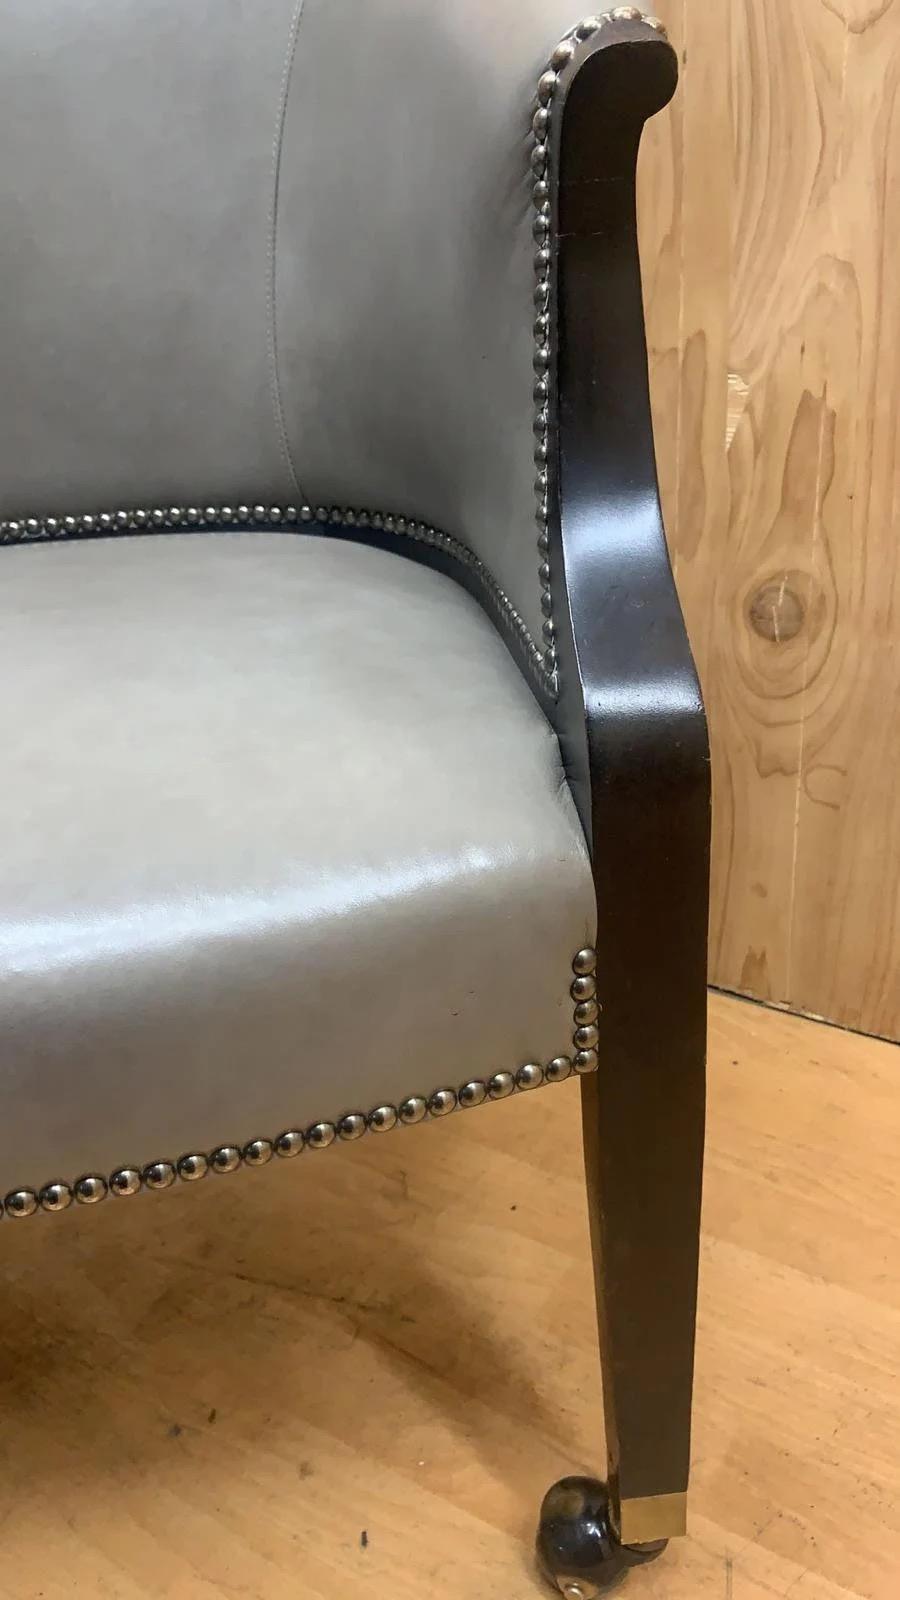 Classic Vintage Castered Barrel Back Side-Chair  w/ Grey Ebonized Frame Upholstered in Original Full Grain Grey Leather by Howard Lorton Furniture & Design's Hickory Chair

The Hickory Chair has a classic form inspired by the aesthetics of 18th